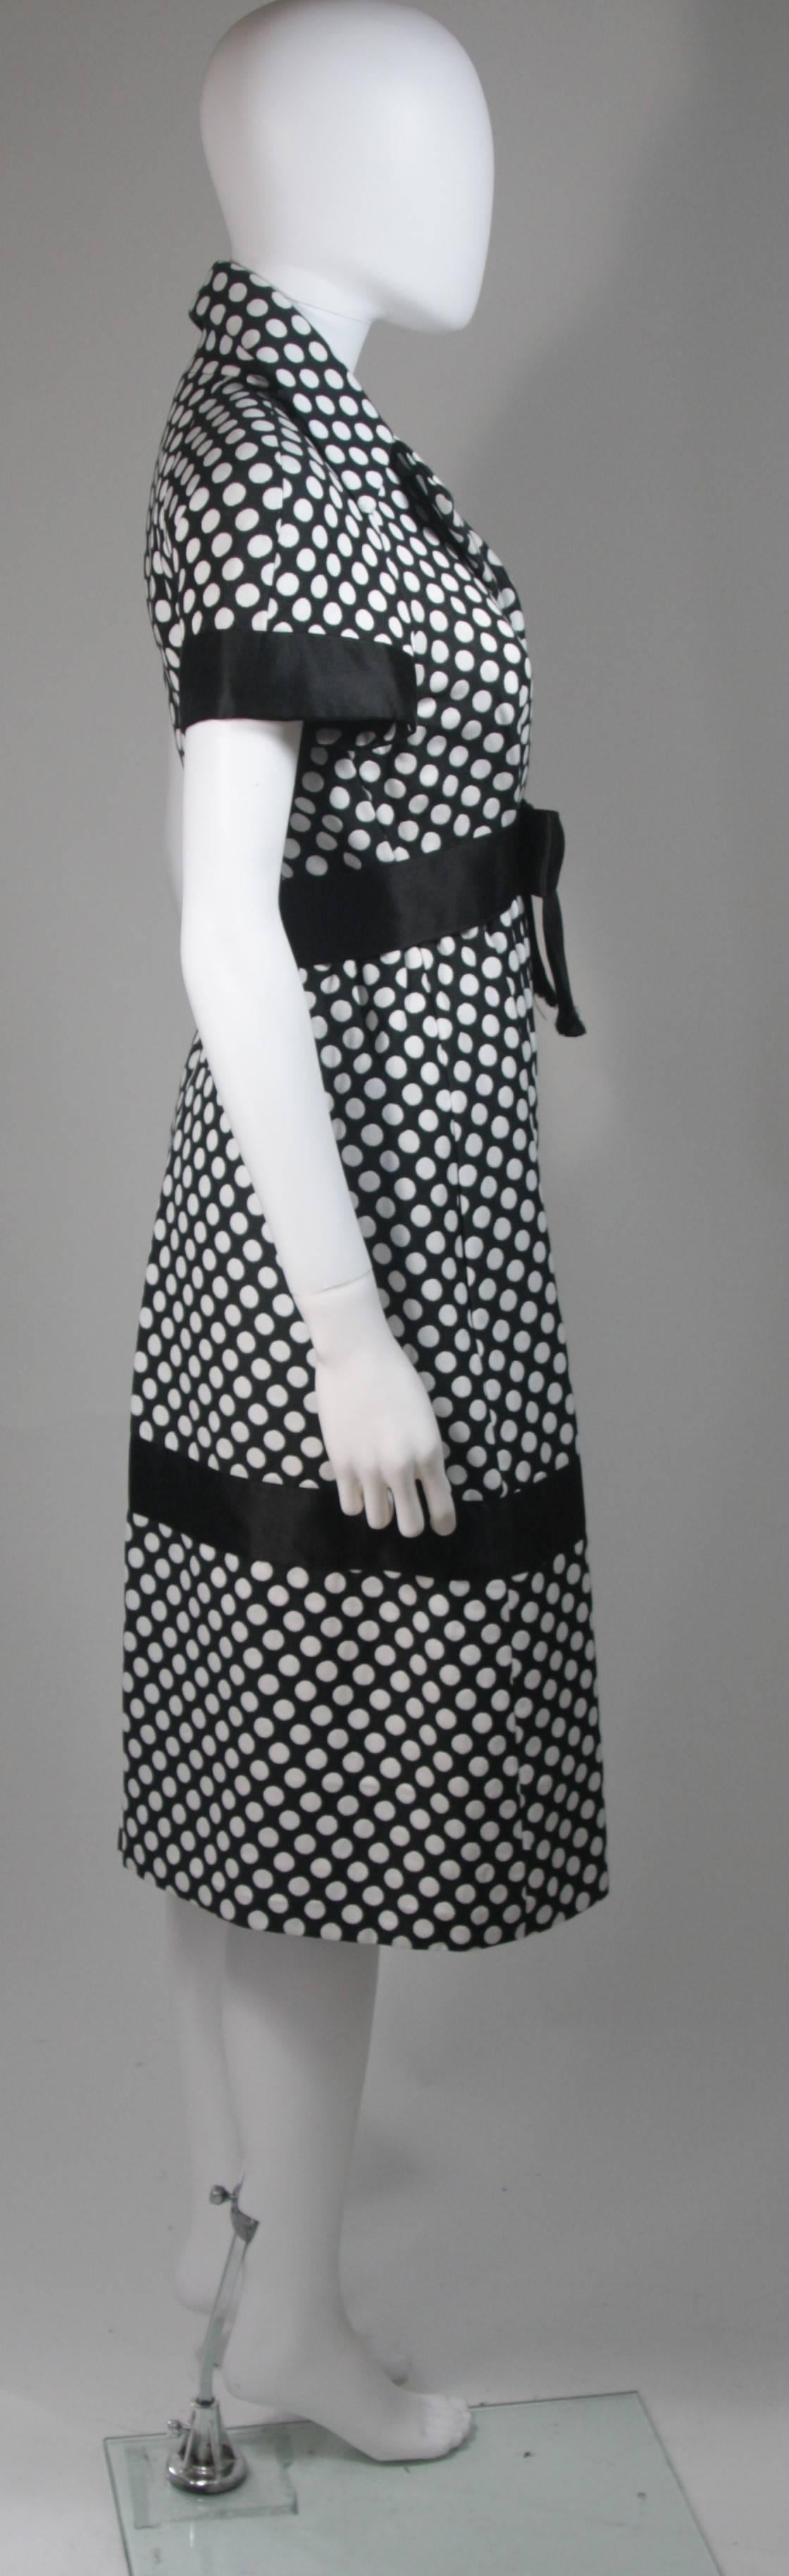 Geoffrey Beene Black and White Polka Dot Dress with Satin Trim Size Small 3